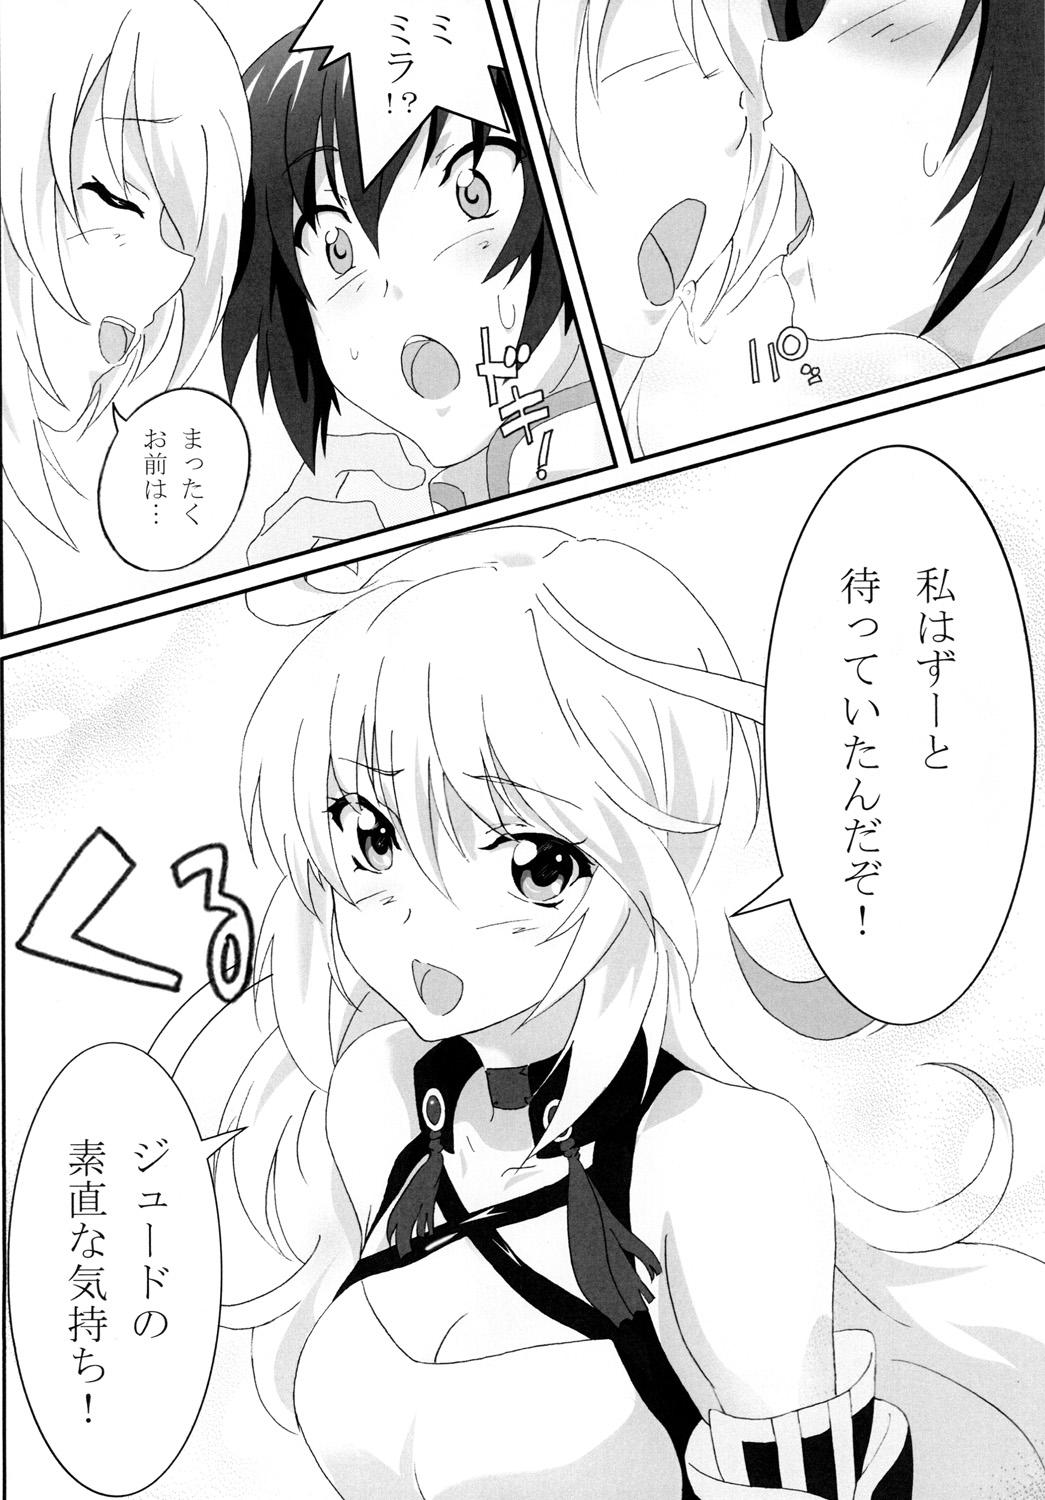 Lesbians Milla Holic - Tales of xillia Young Tits - Page 7